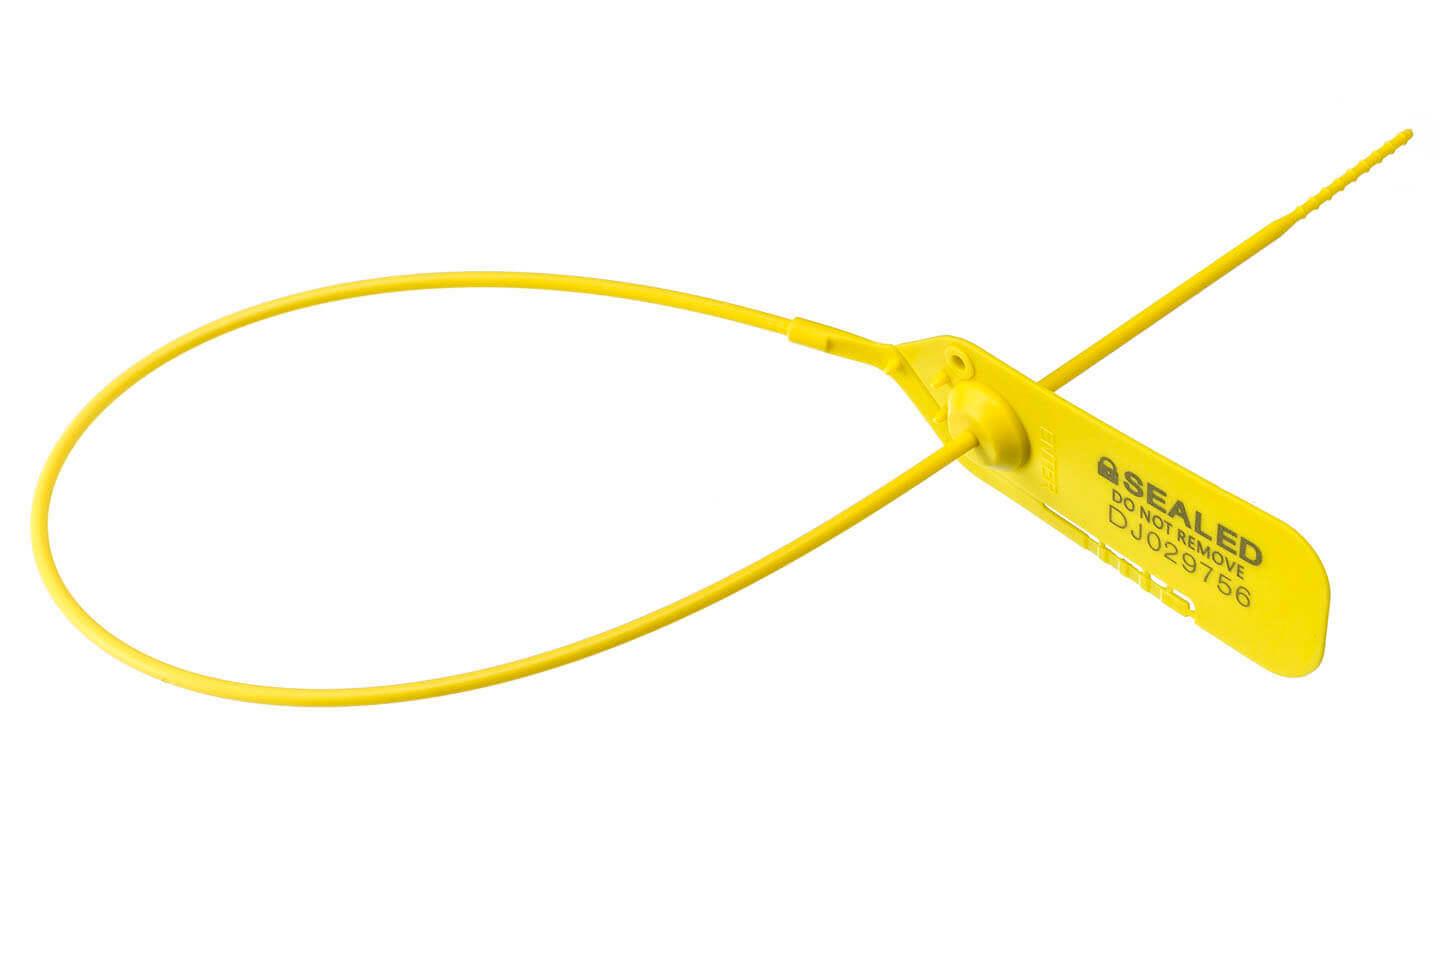 Plastic Seal DS-J 500 Yellow by Hoefon Security Seals